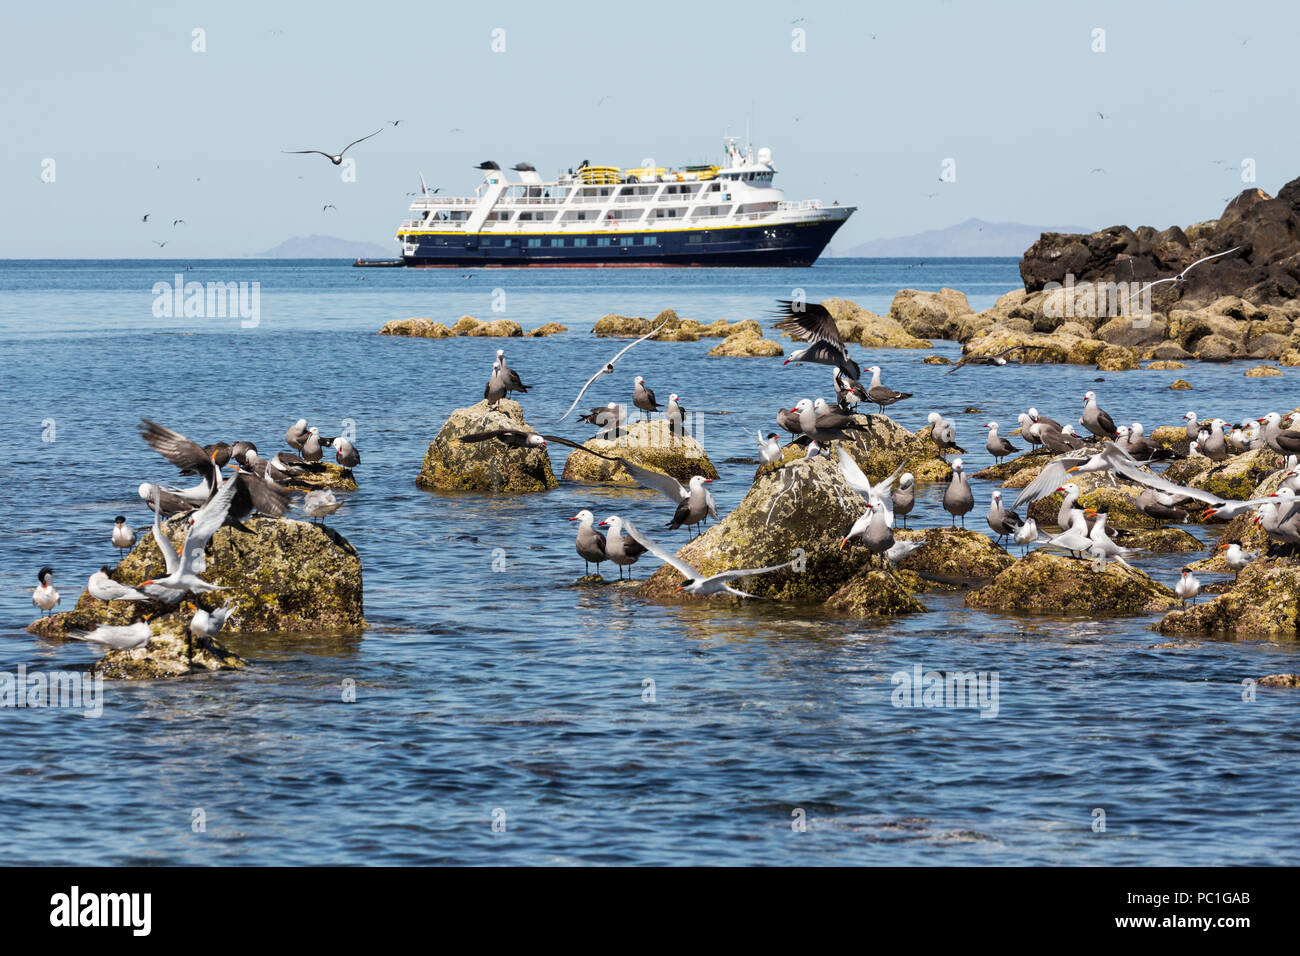 The Lindblad Expeditions ship National Geographic Sea Lion in Baja California, Mexico. Stock Photo